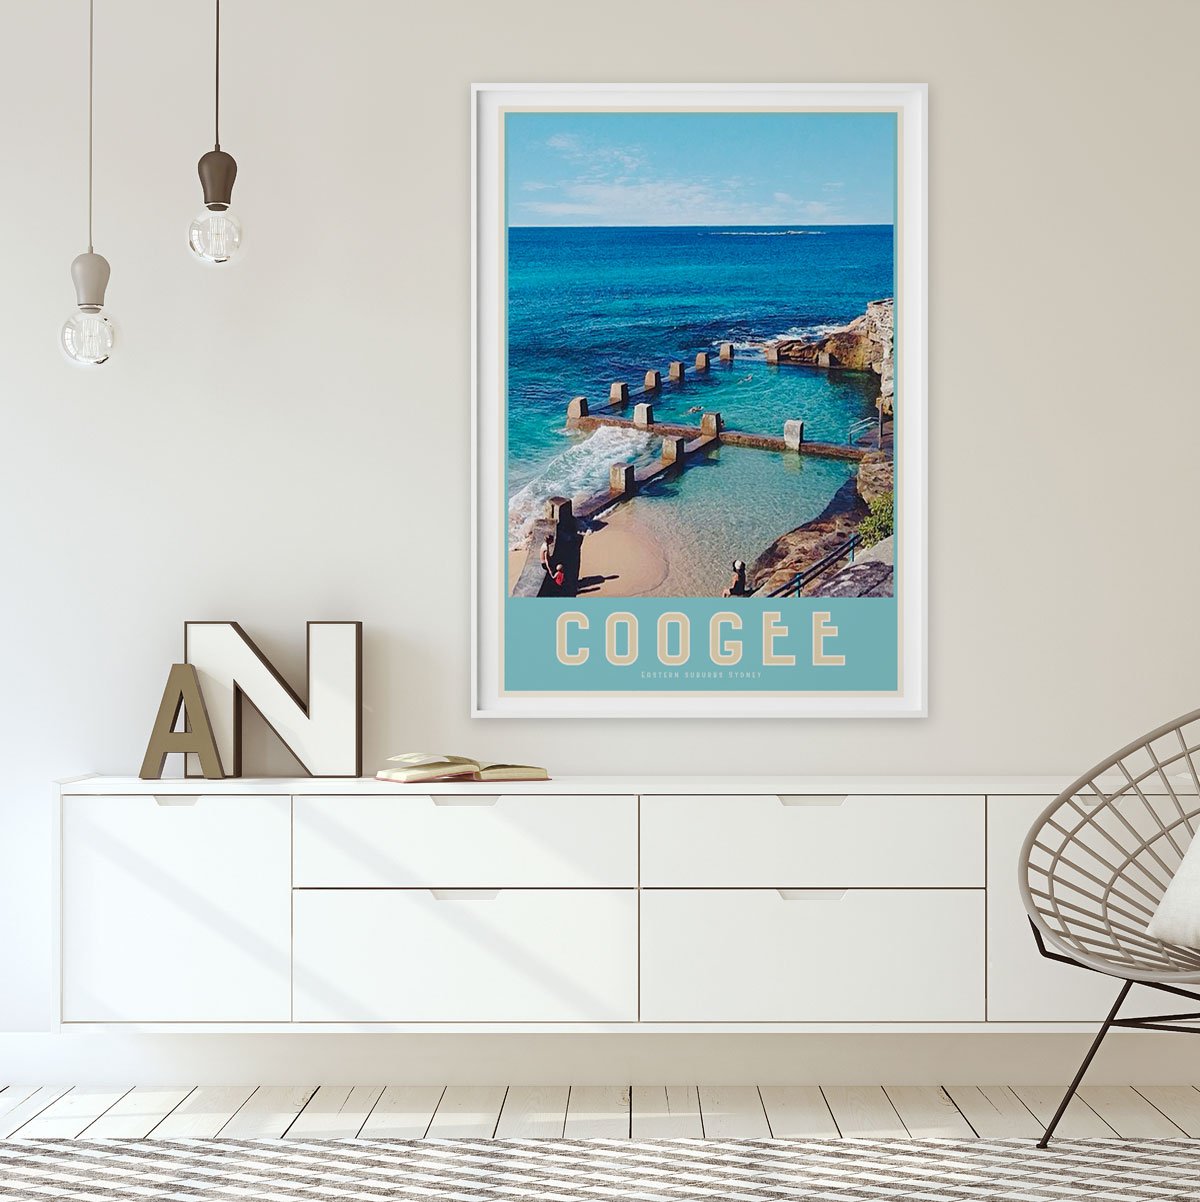 Coogee Ross Jones Pool framed print places we luv